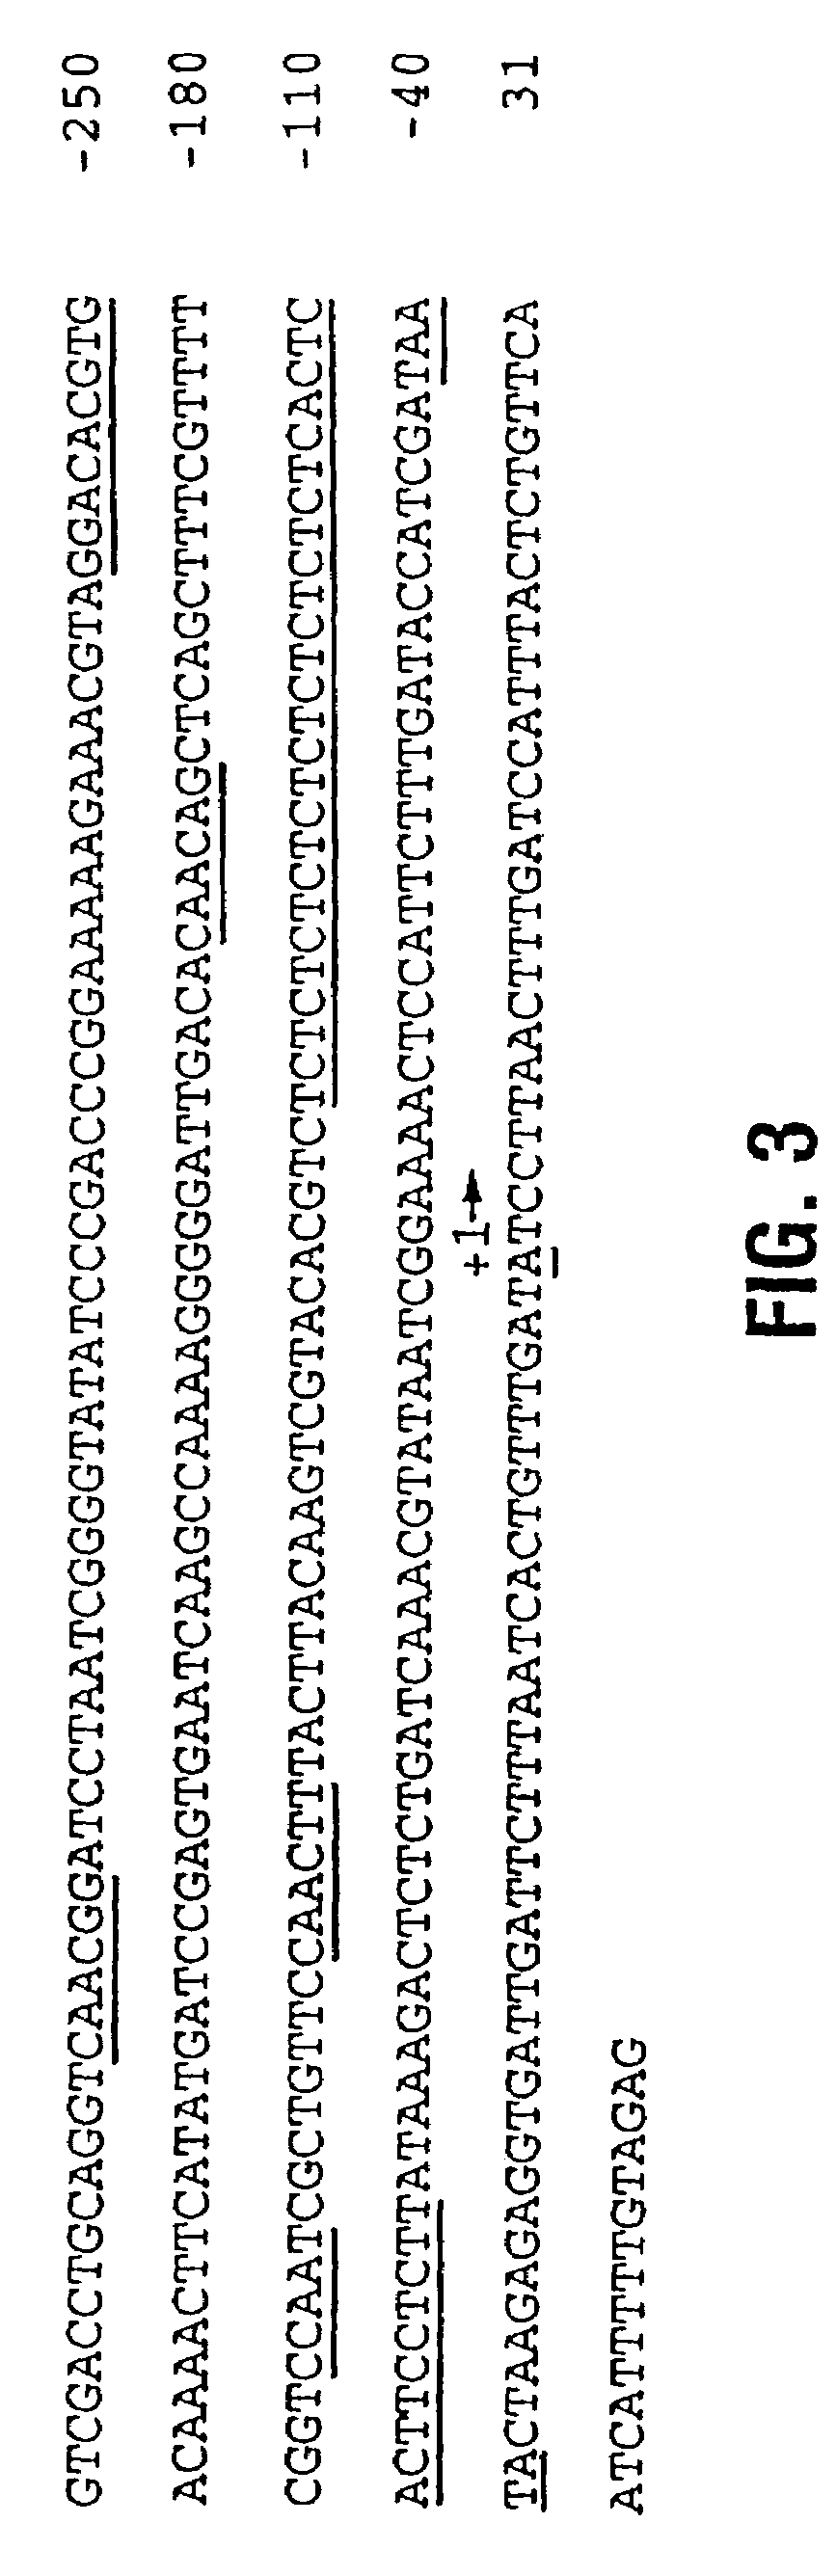 Plants with enhanced levels of nitrogen utilization proteins in their root epidermis and uses thereof